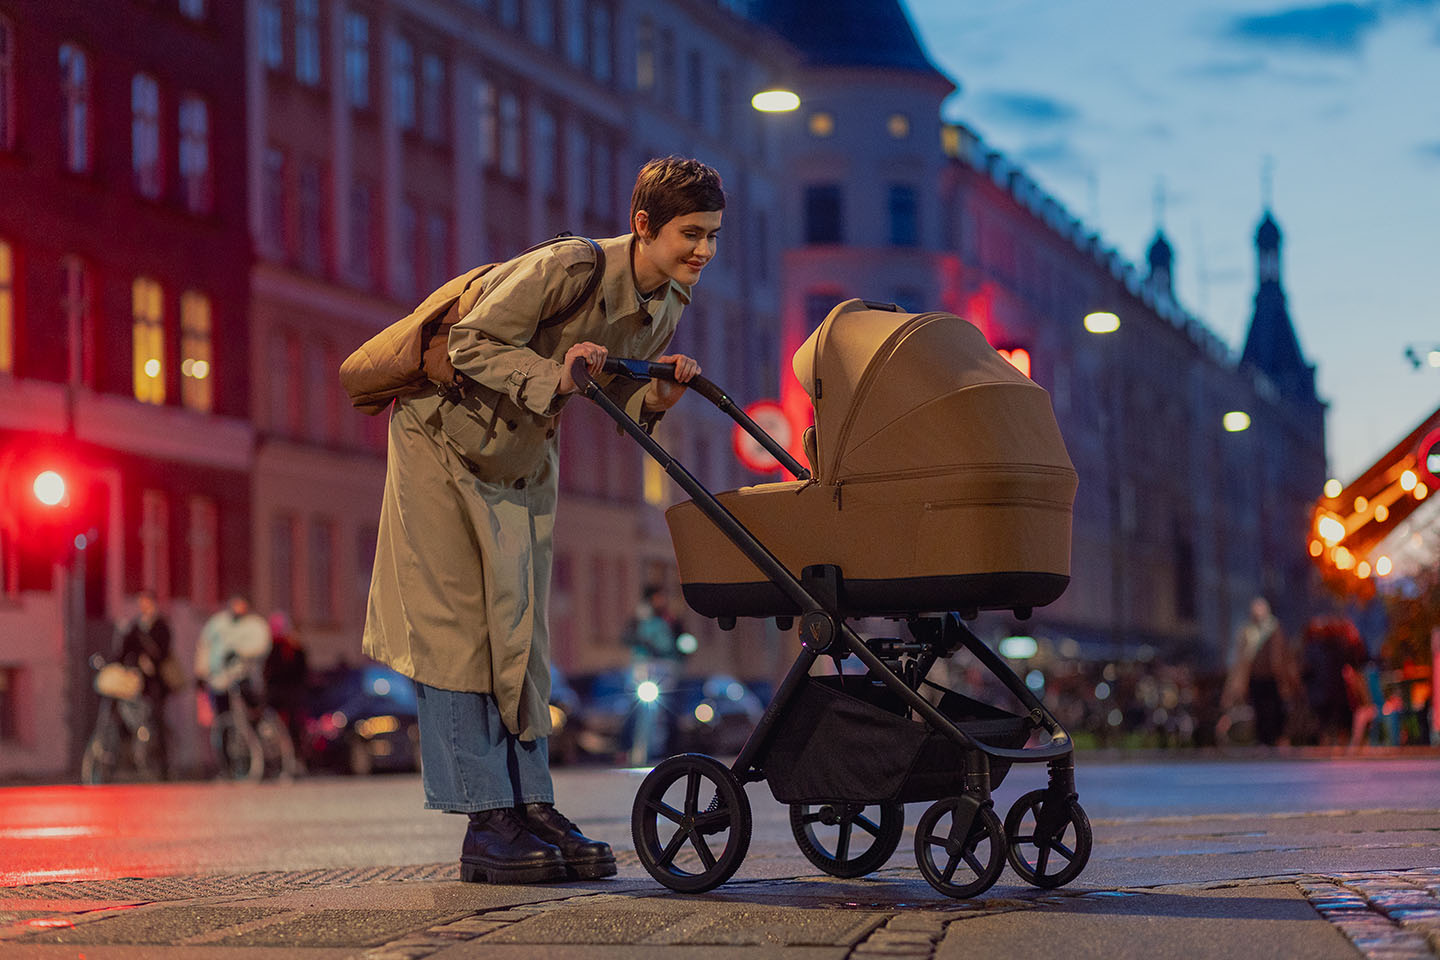 A mother and a baby in Venicci Claro pram pushchair during nighttime